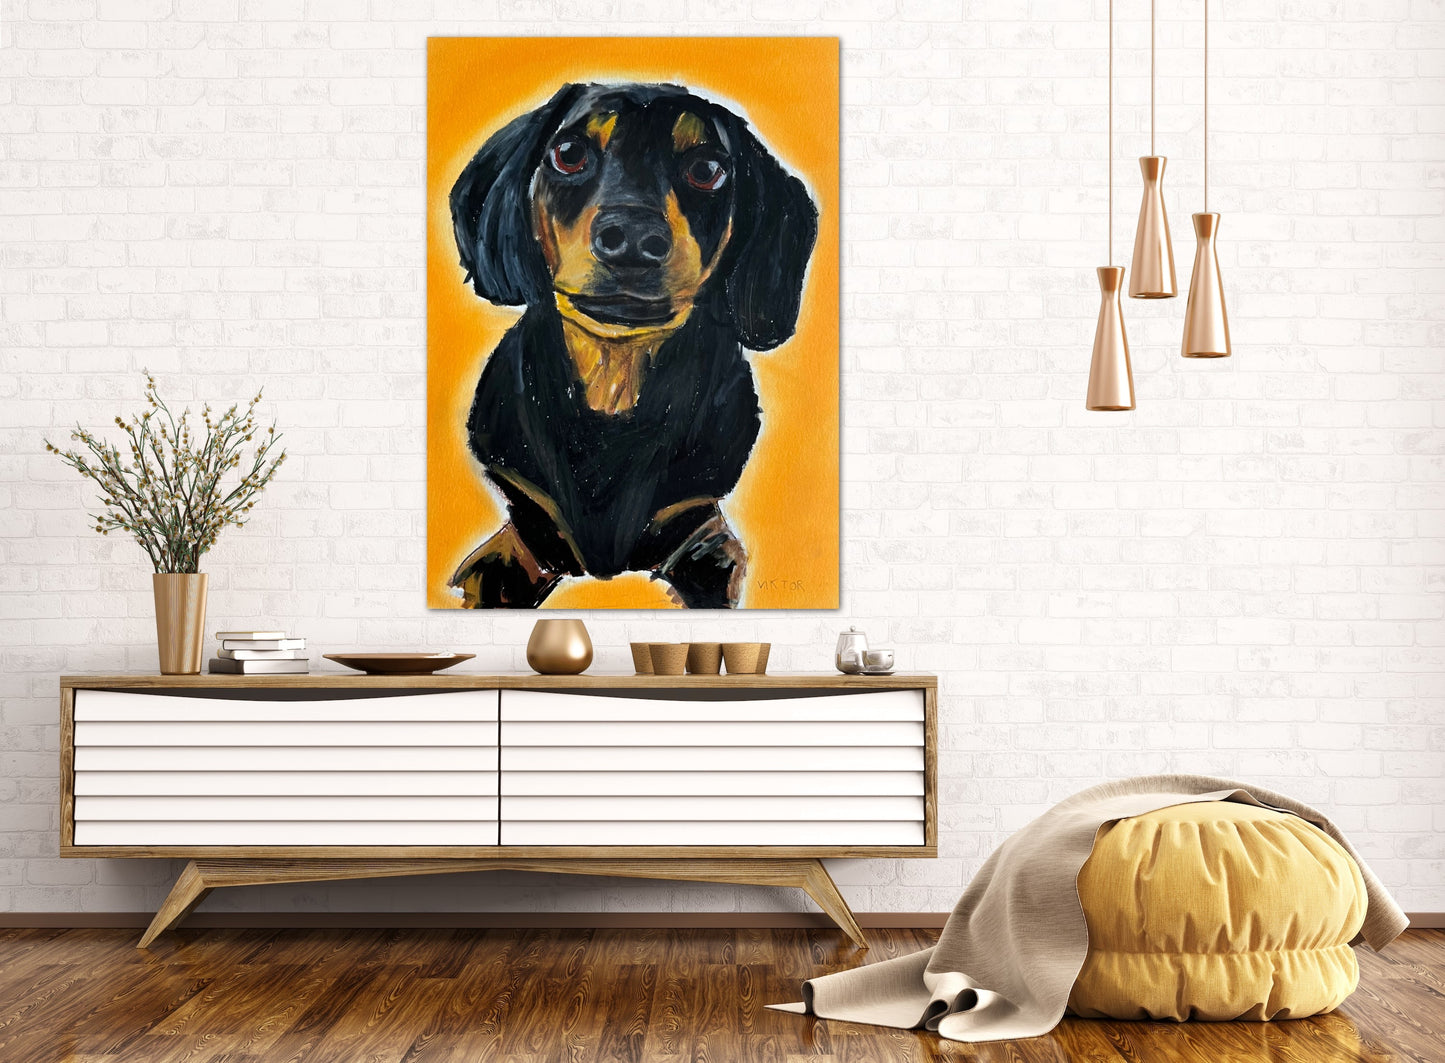 Mini Dachshund - Print, Poster or Stretched Canvas Print in more sizes